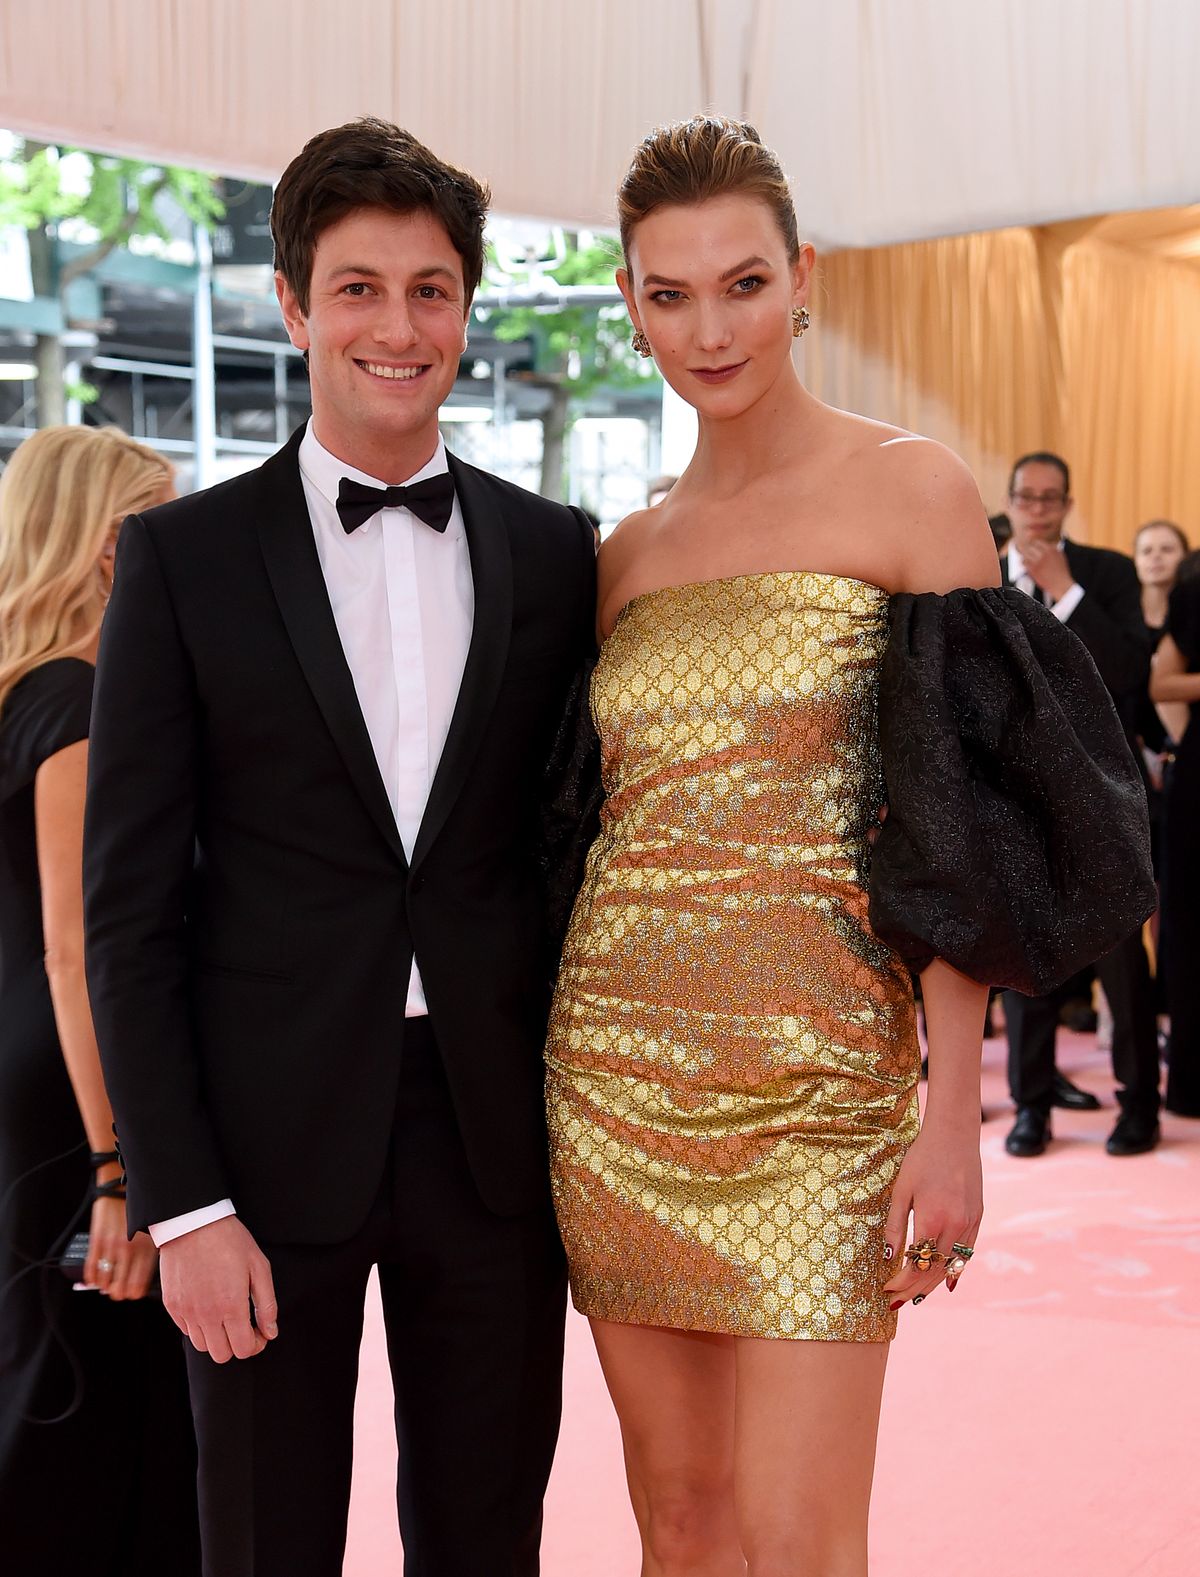 Joshua Kushner and Karlie Kloss at The 2019 Met Gala Celebrating Camp on May 06, 2019 | Getty Images 